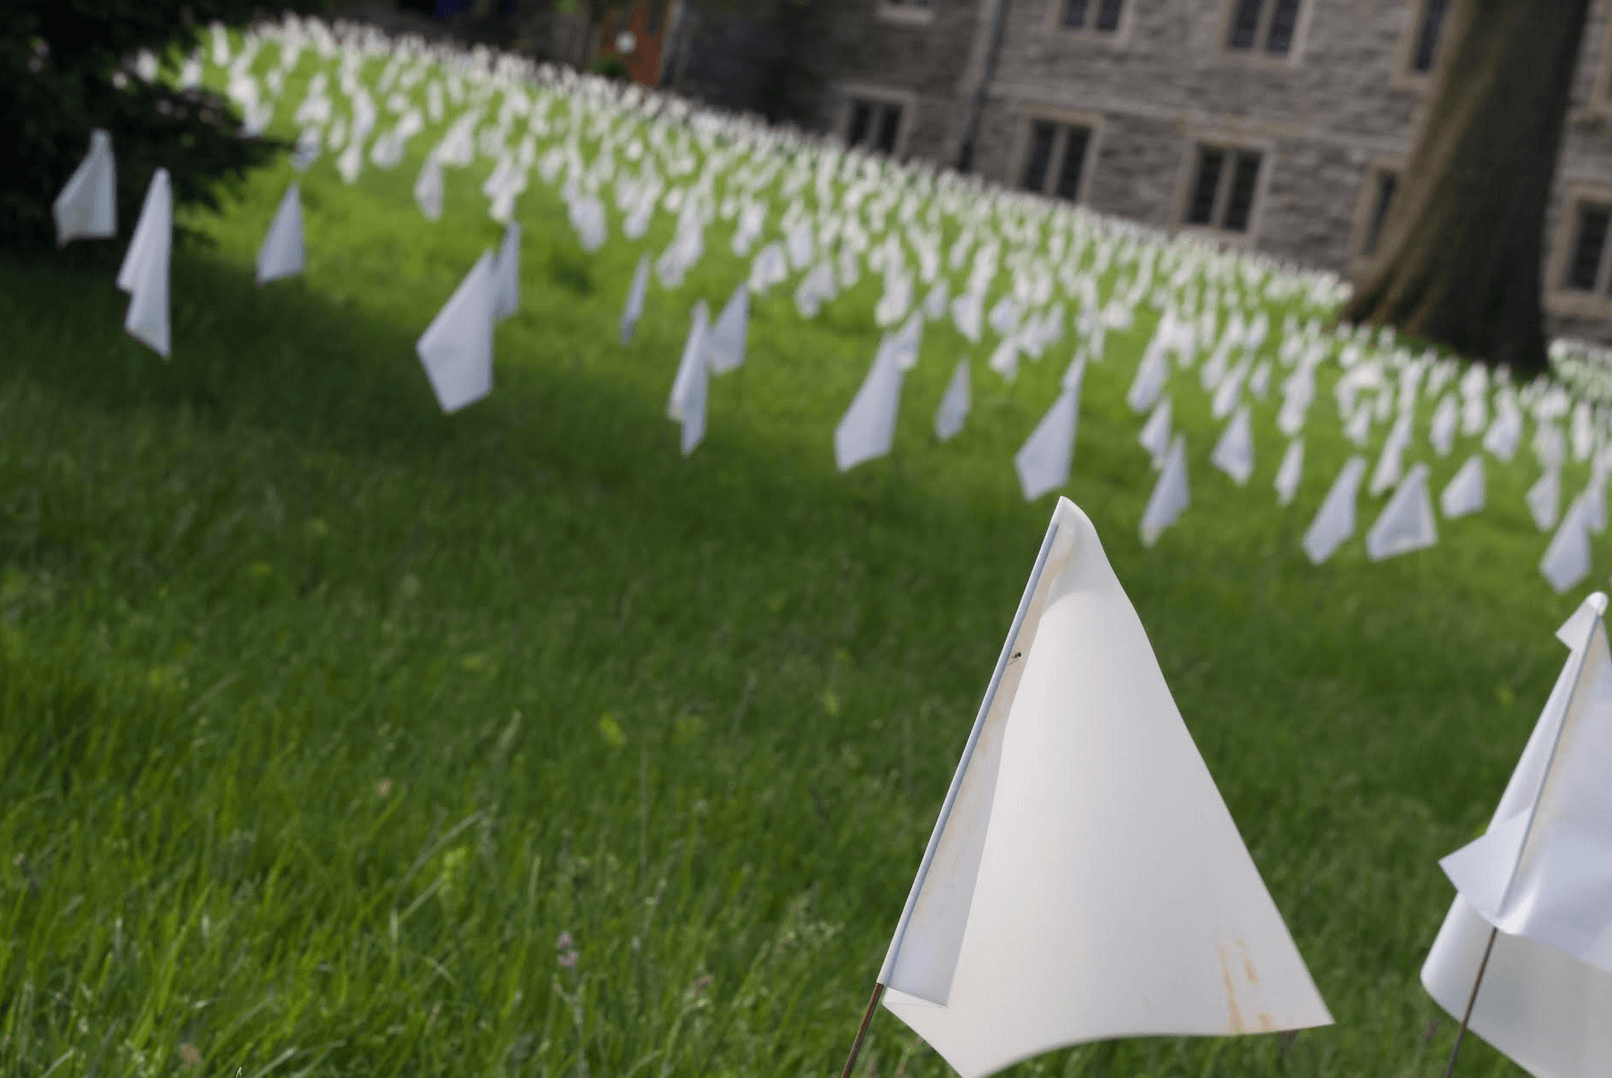 White flags on the lawn of First Church in Old Greenwich. Photo: Oura Miyazaki